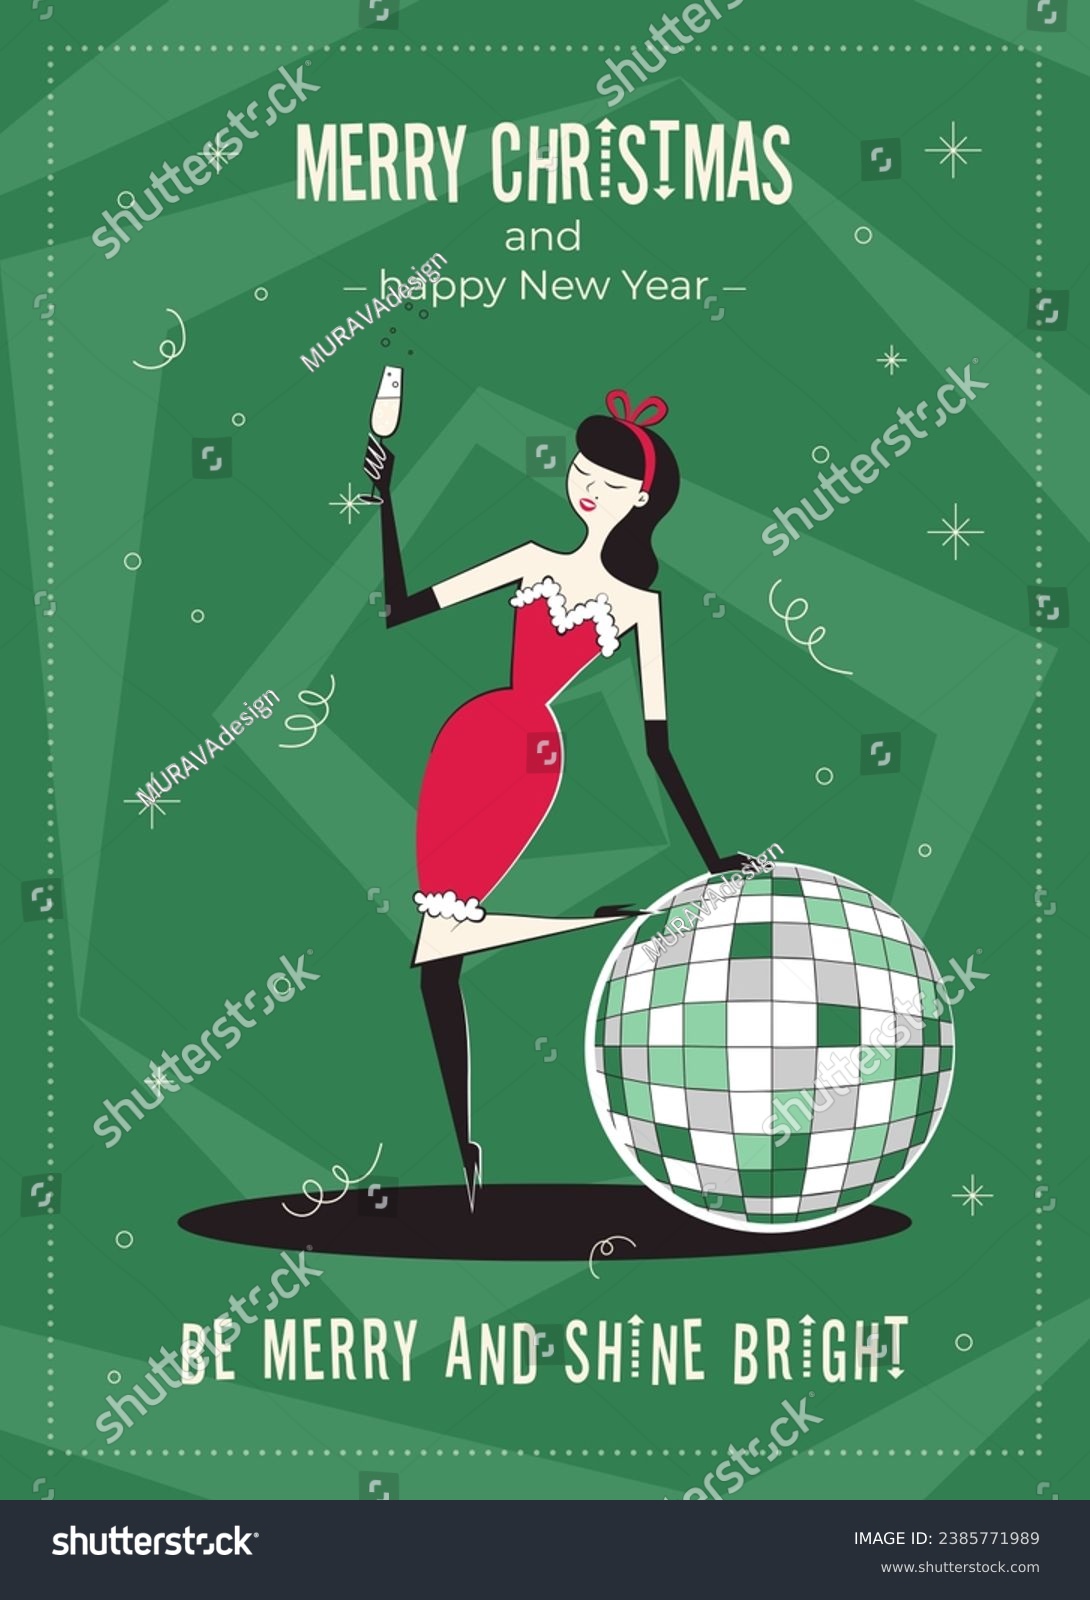 SVG of Merry Christmas and happy New Year greeting card. 60s-70s retro style poster with Christmas wishes text. Woman characters in red dress, holding champagne glass, with disco ball. svg